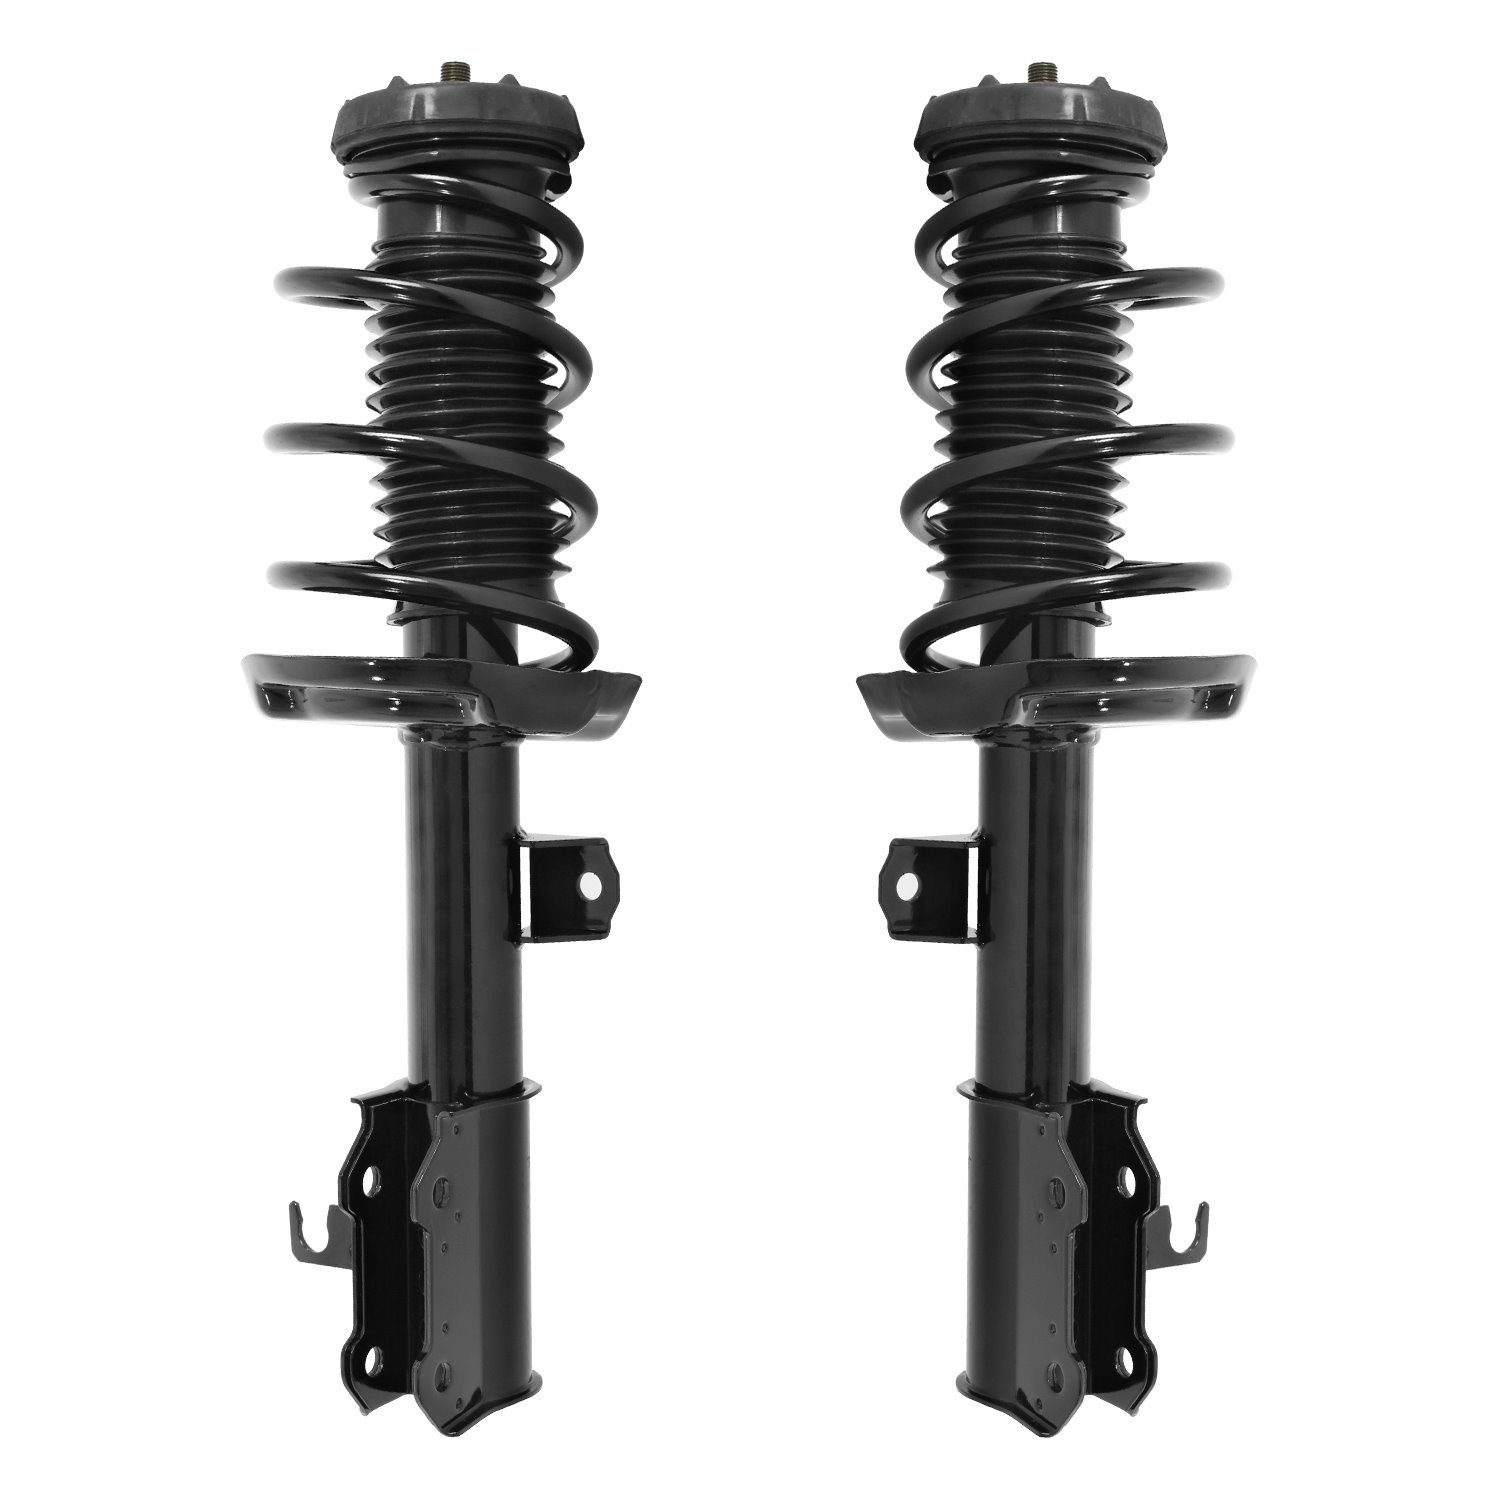 2-11881-11882-001 Suspension Strut & Coil Spring Assembly Set Fits Select Chevy Cruze